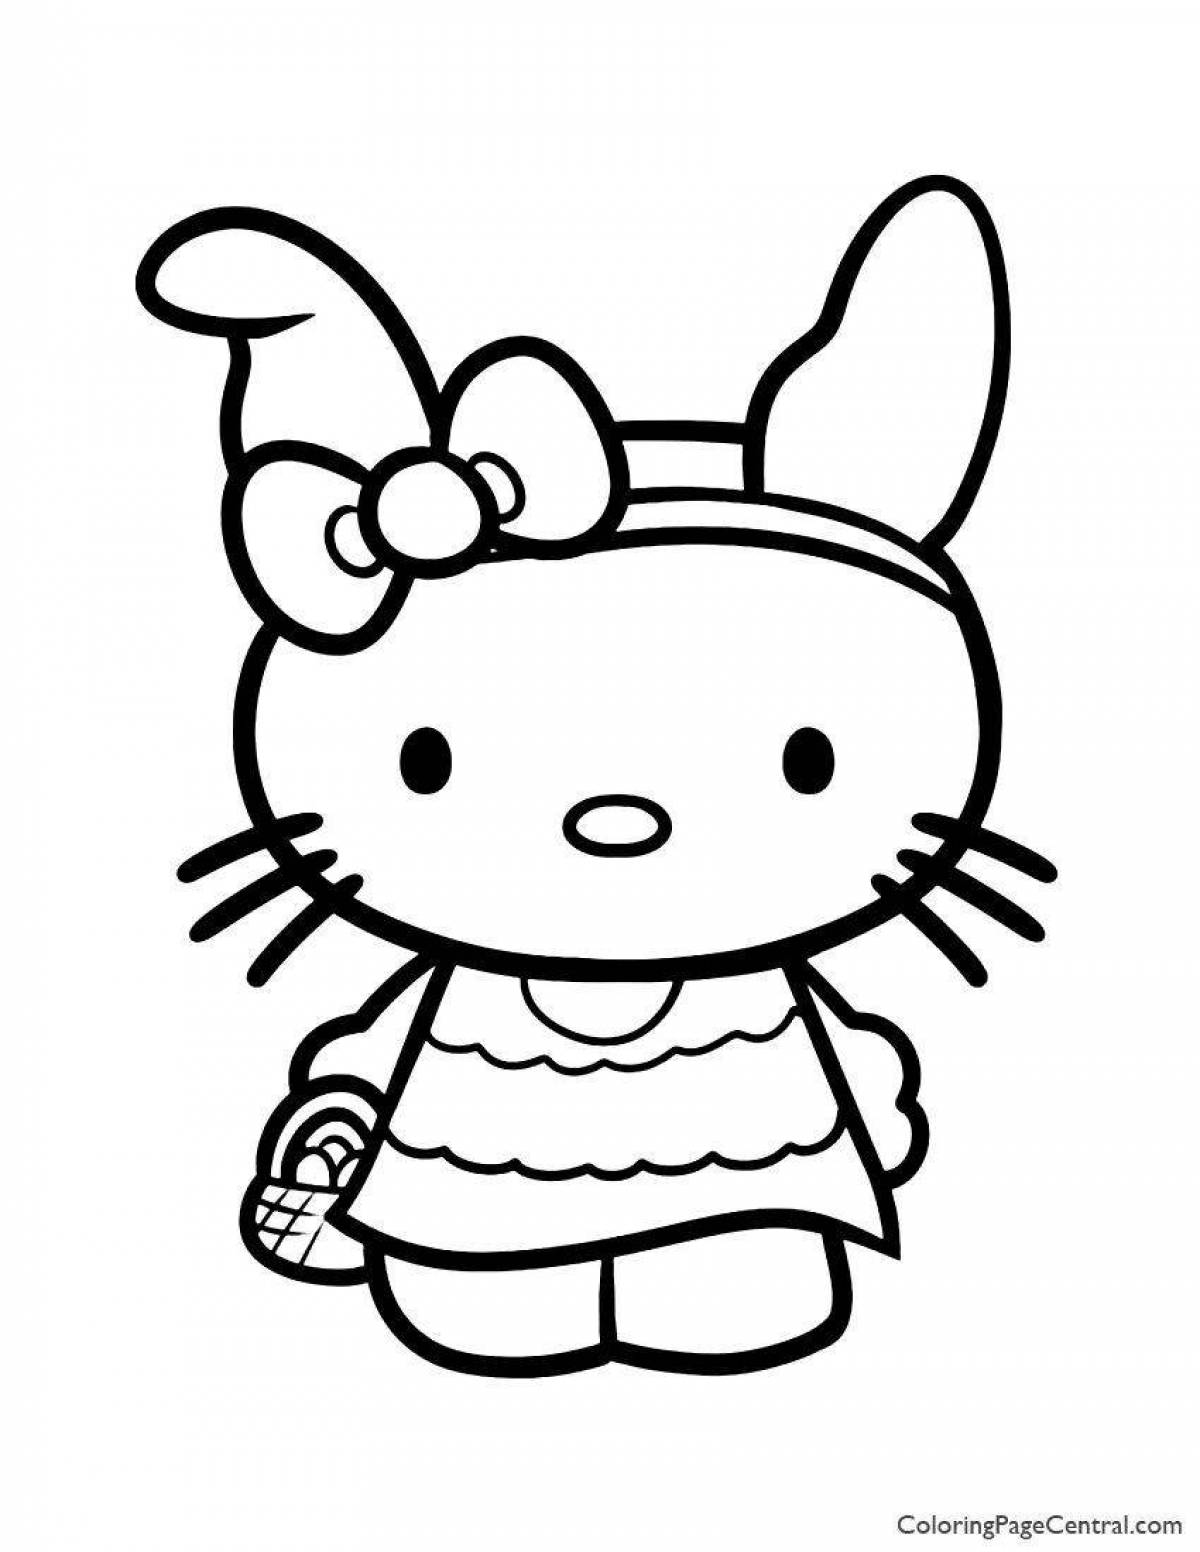 Charming coloring hello kitty in a dress